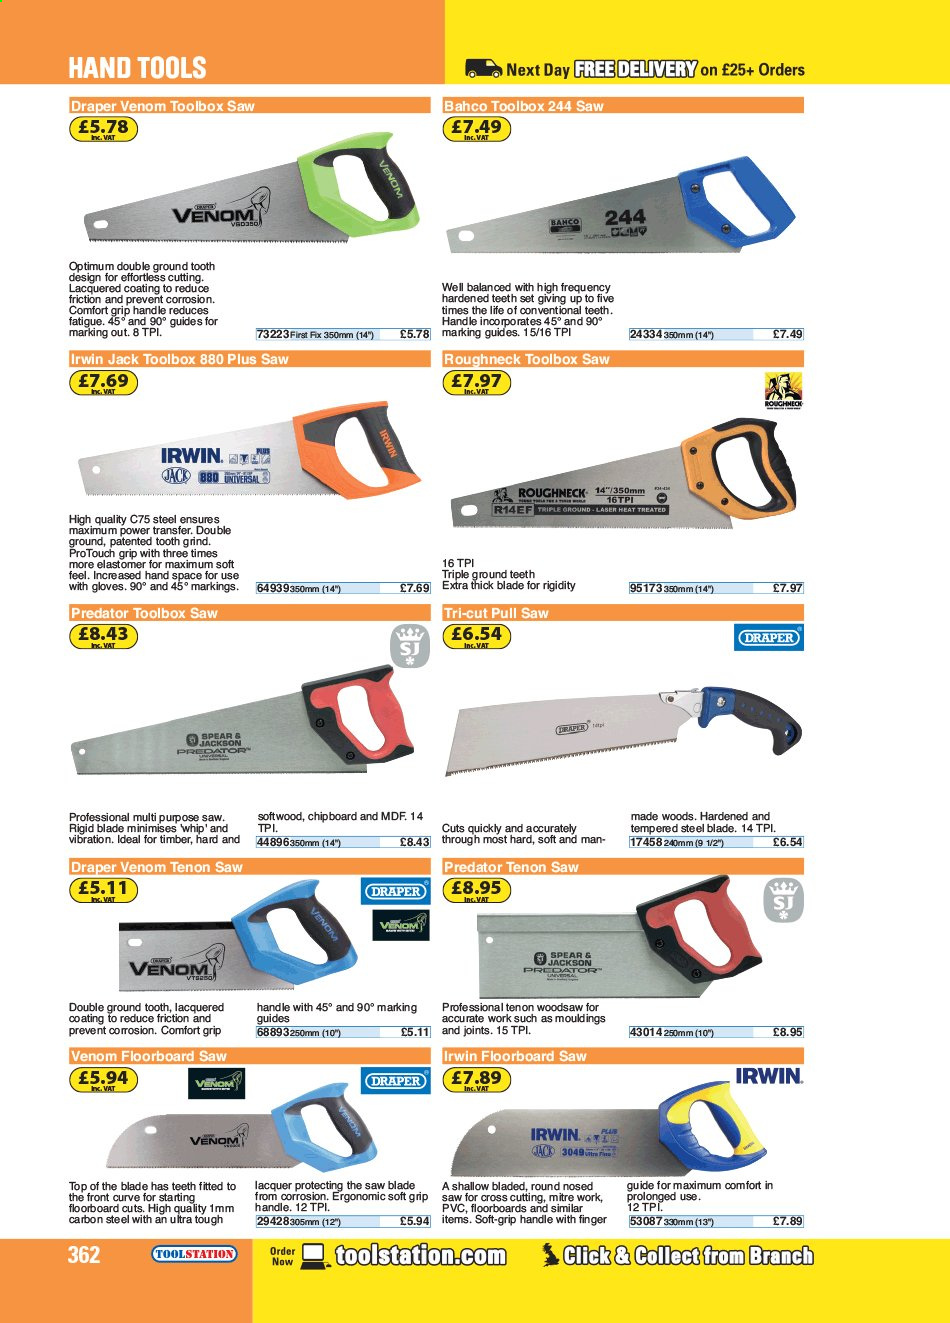 Toolstation offer . Page 362.